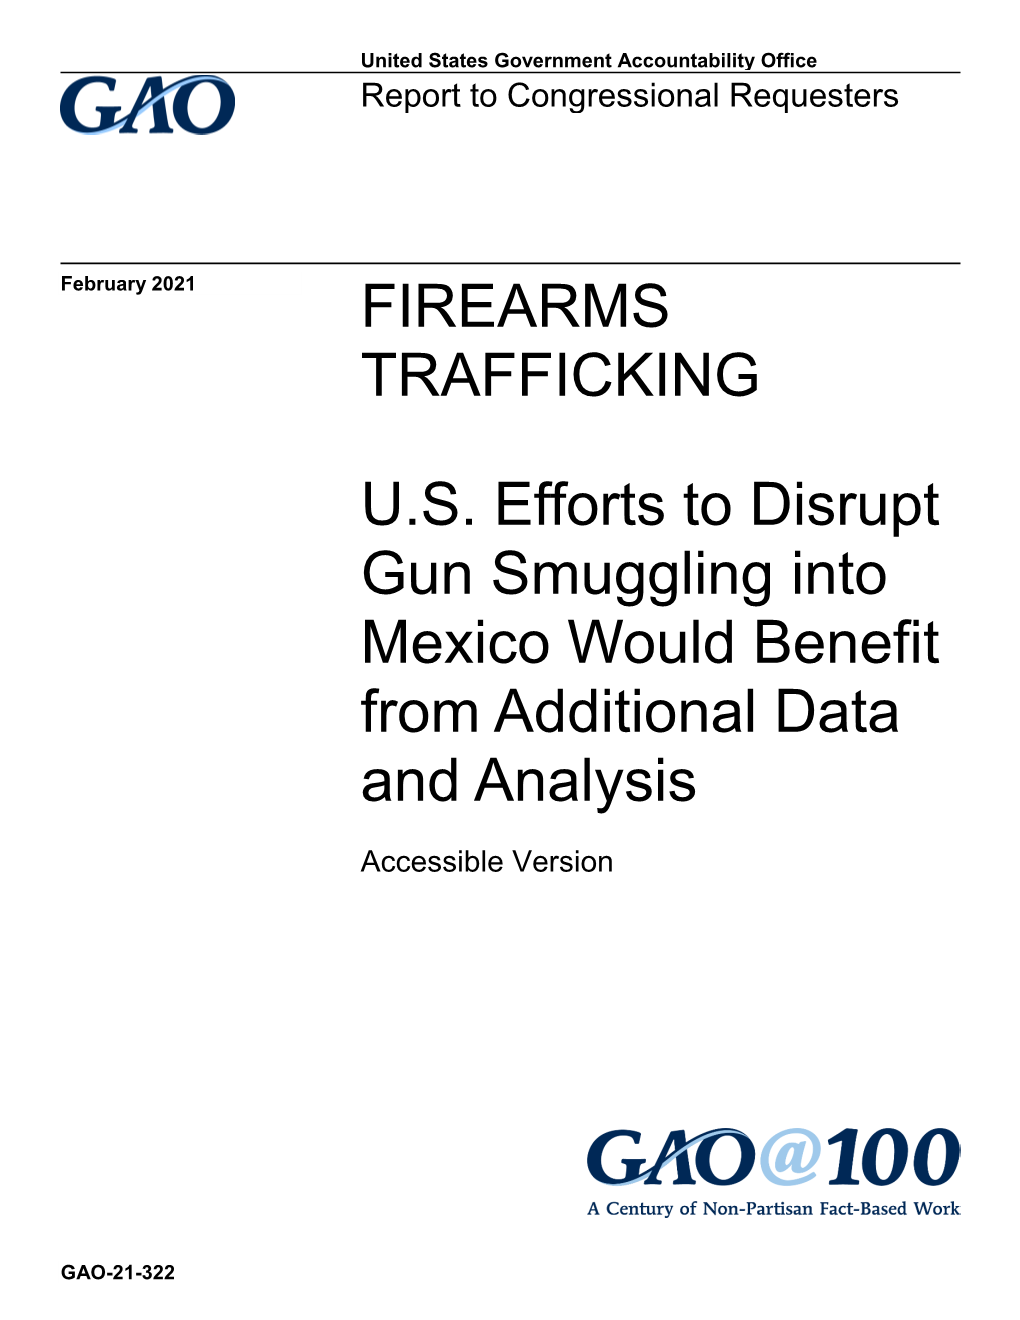 GAO-21-322, Accessible Version, FIREARMS TRAFFICKING: U.S. Efforts to Disrupt Gun Smuggling to Mexico Would Benefit from Additio